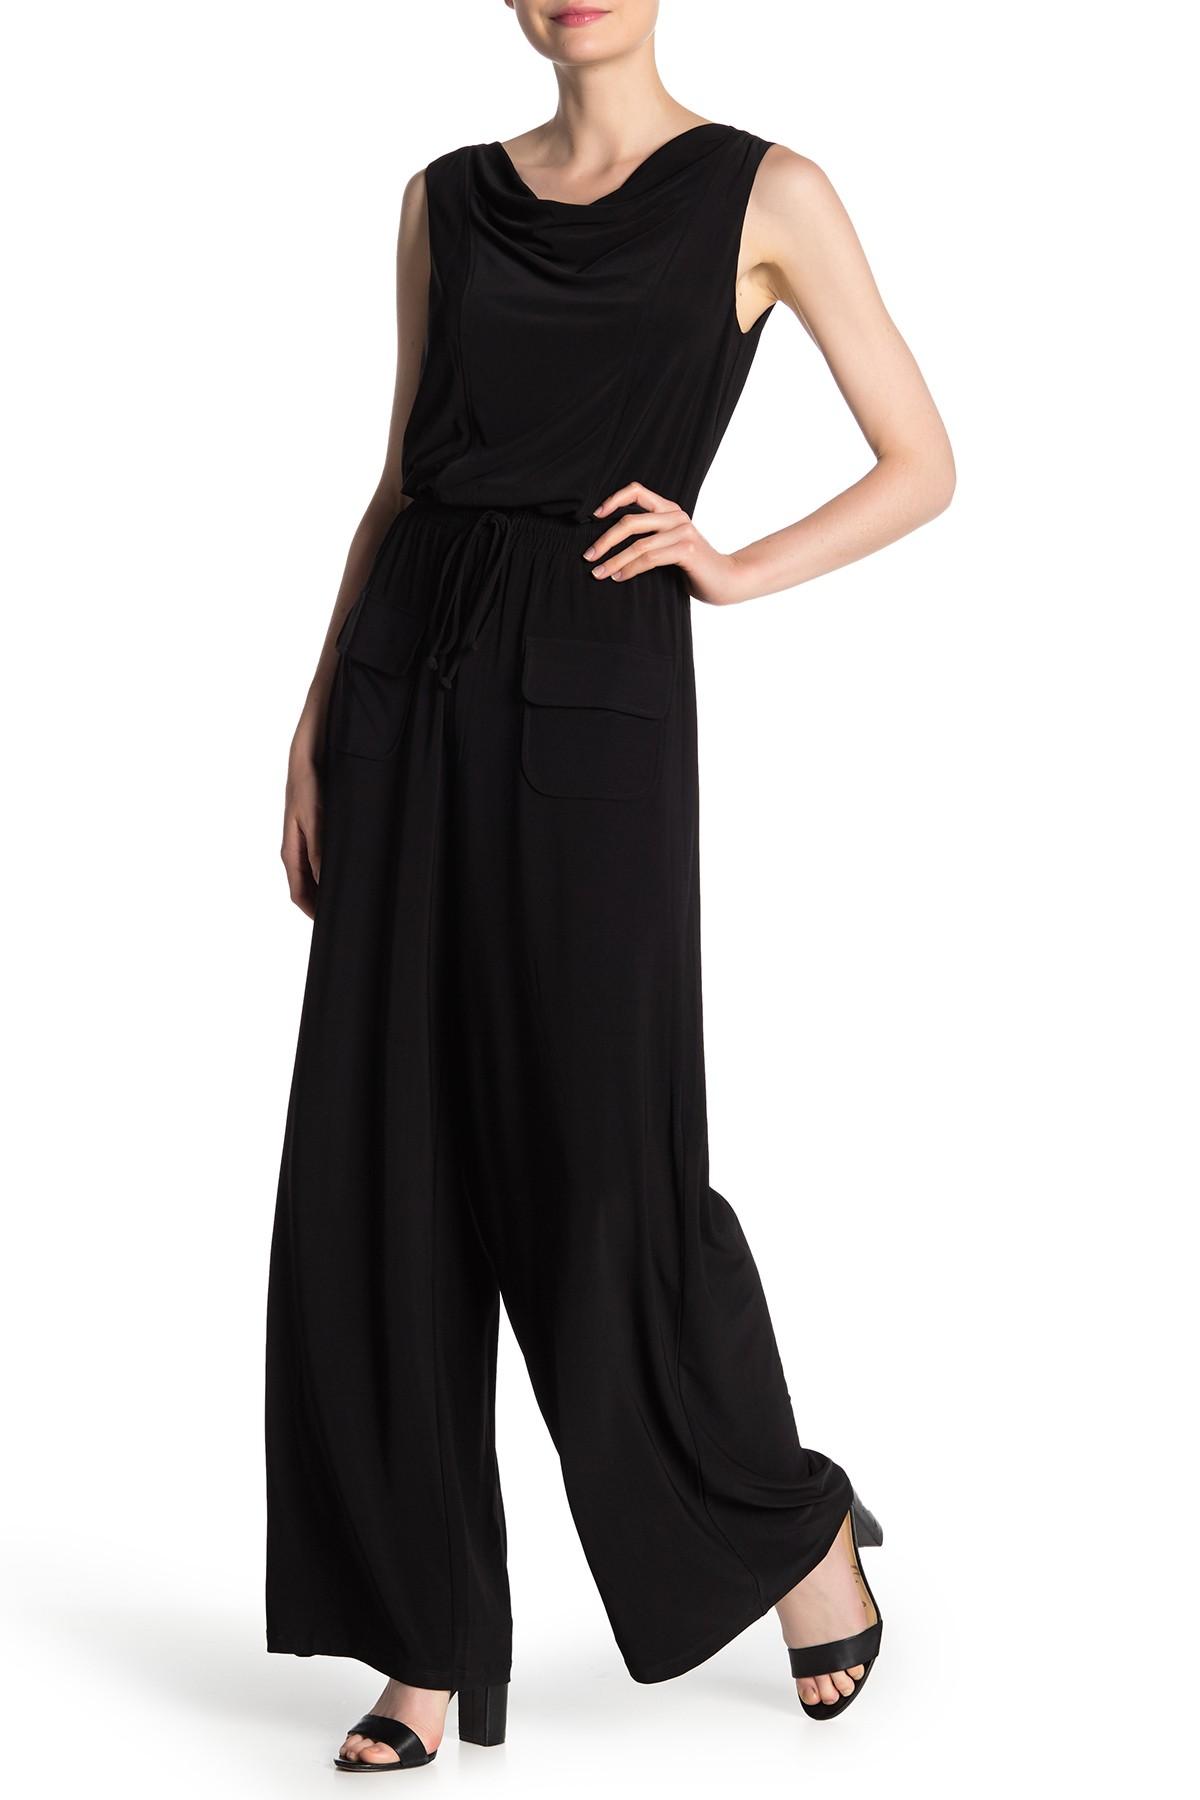 Vince Camuto Sleeveless Cowl Neck Jumpsuit in Black - Lyst